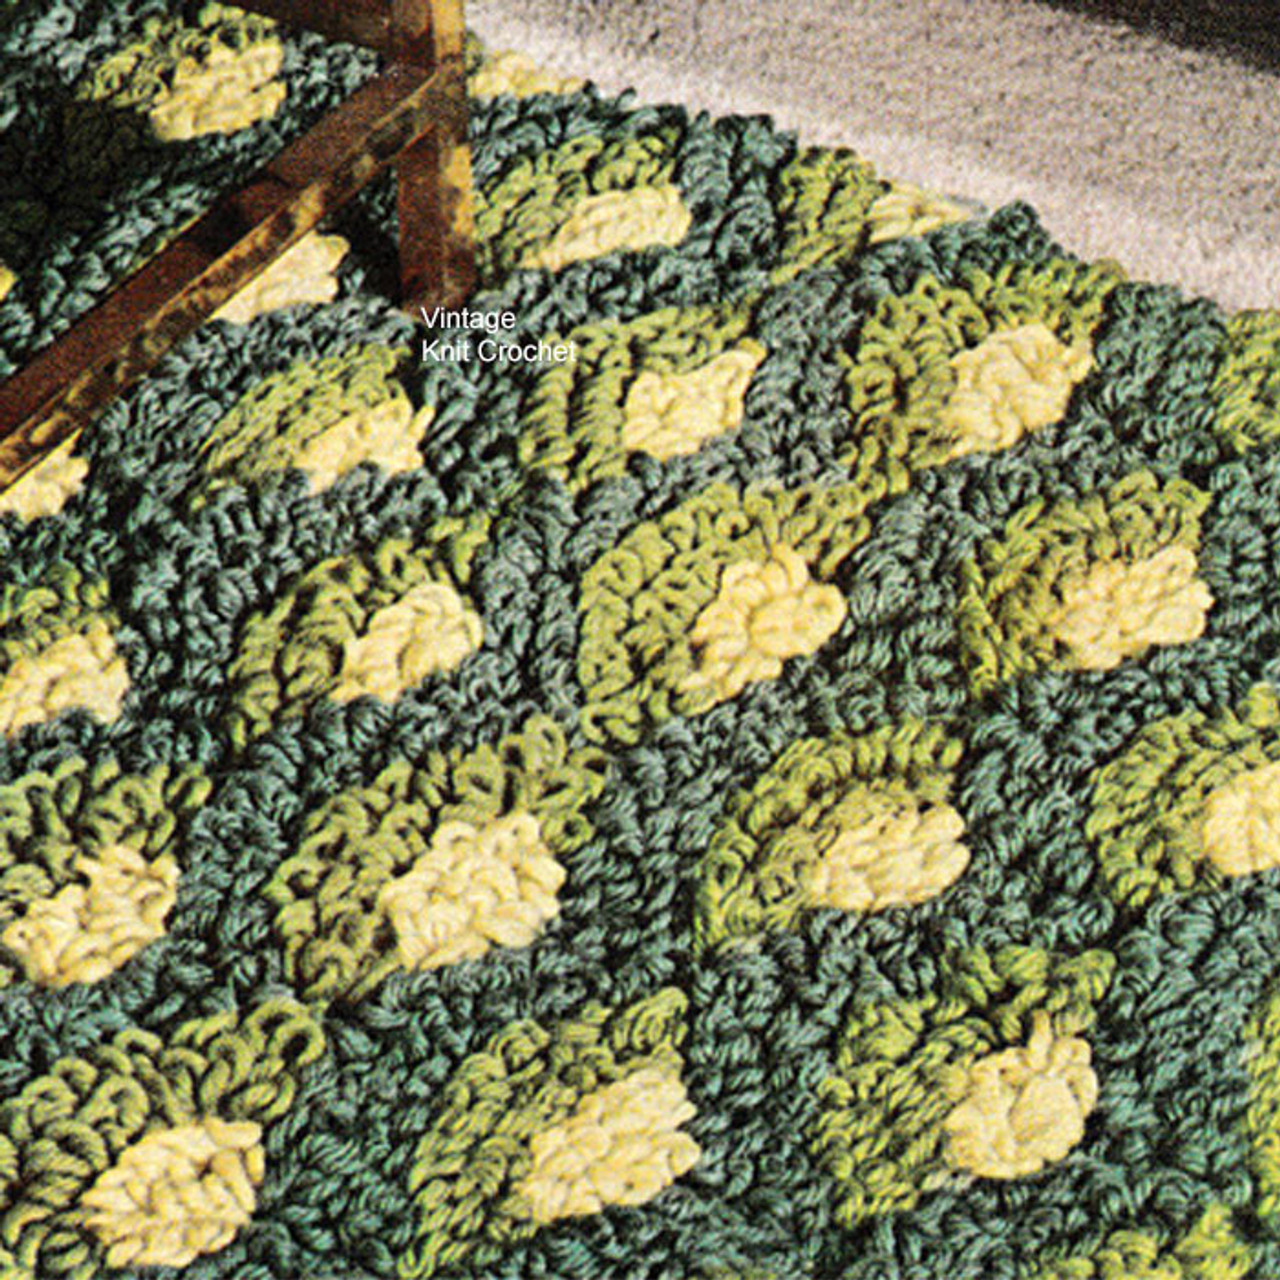 Sea Shell Crochet Rug Pattern is 24 x 44 inches